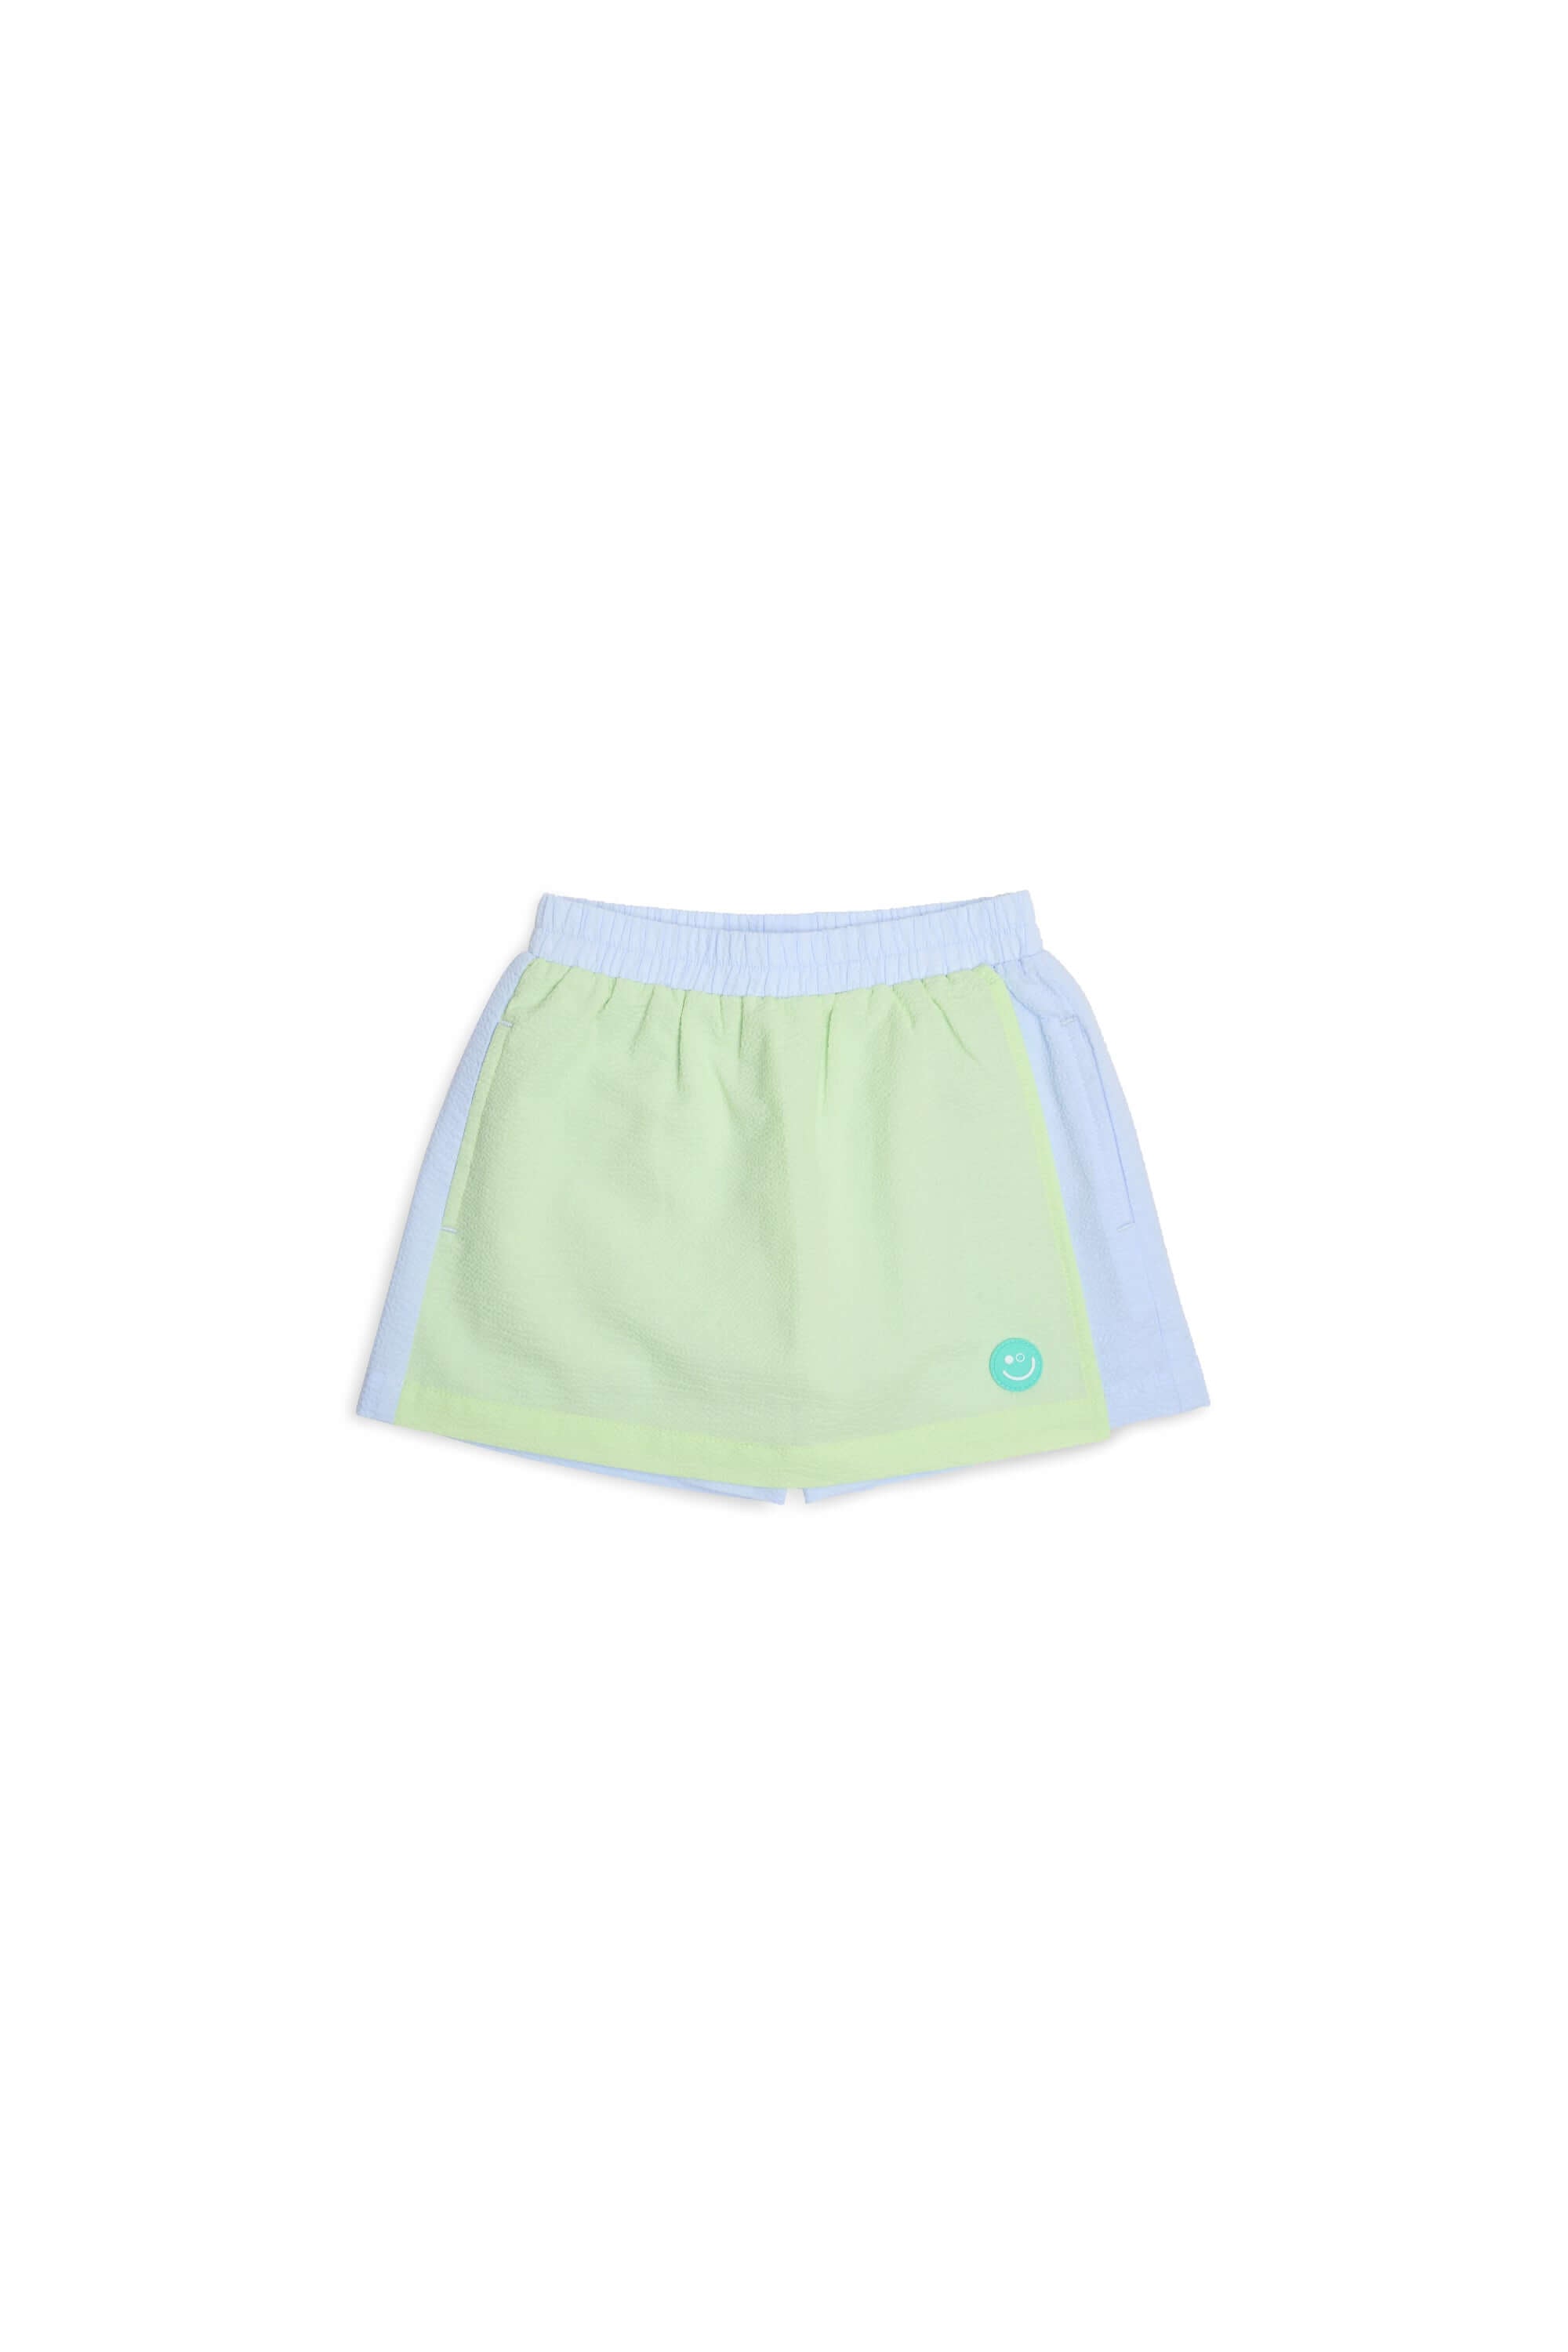 Lime/Periwinkle